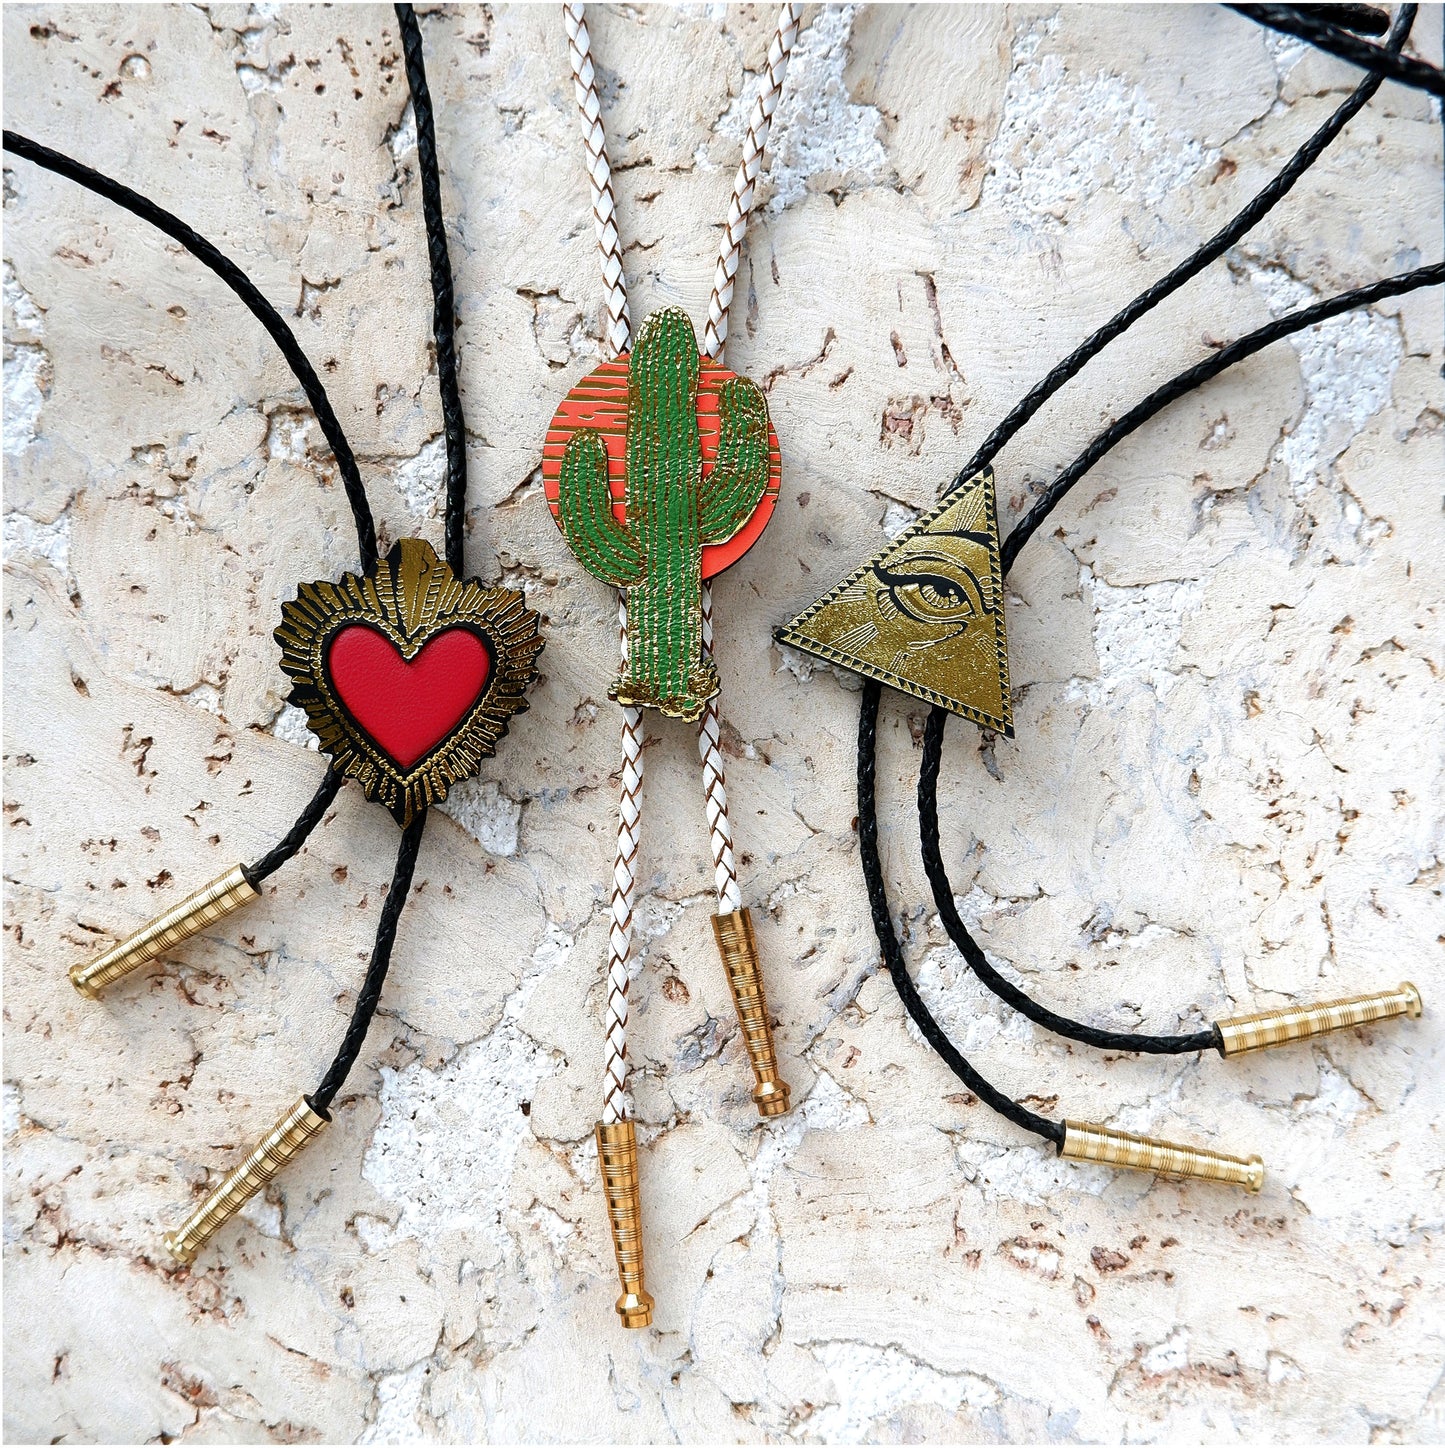 leather bolo ties Red Sacred Heart, desert Sun Cactus Sunset bola string tie All seeing eye magic eye amulet leather string tie westernwear western style